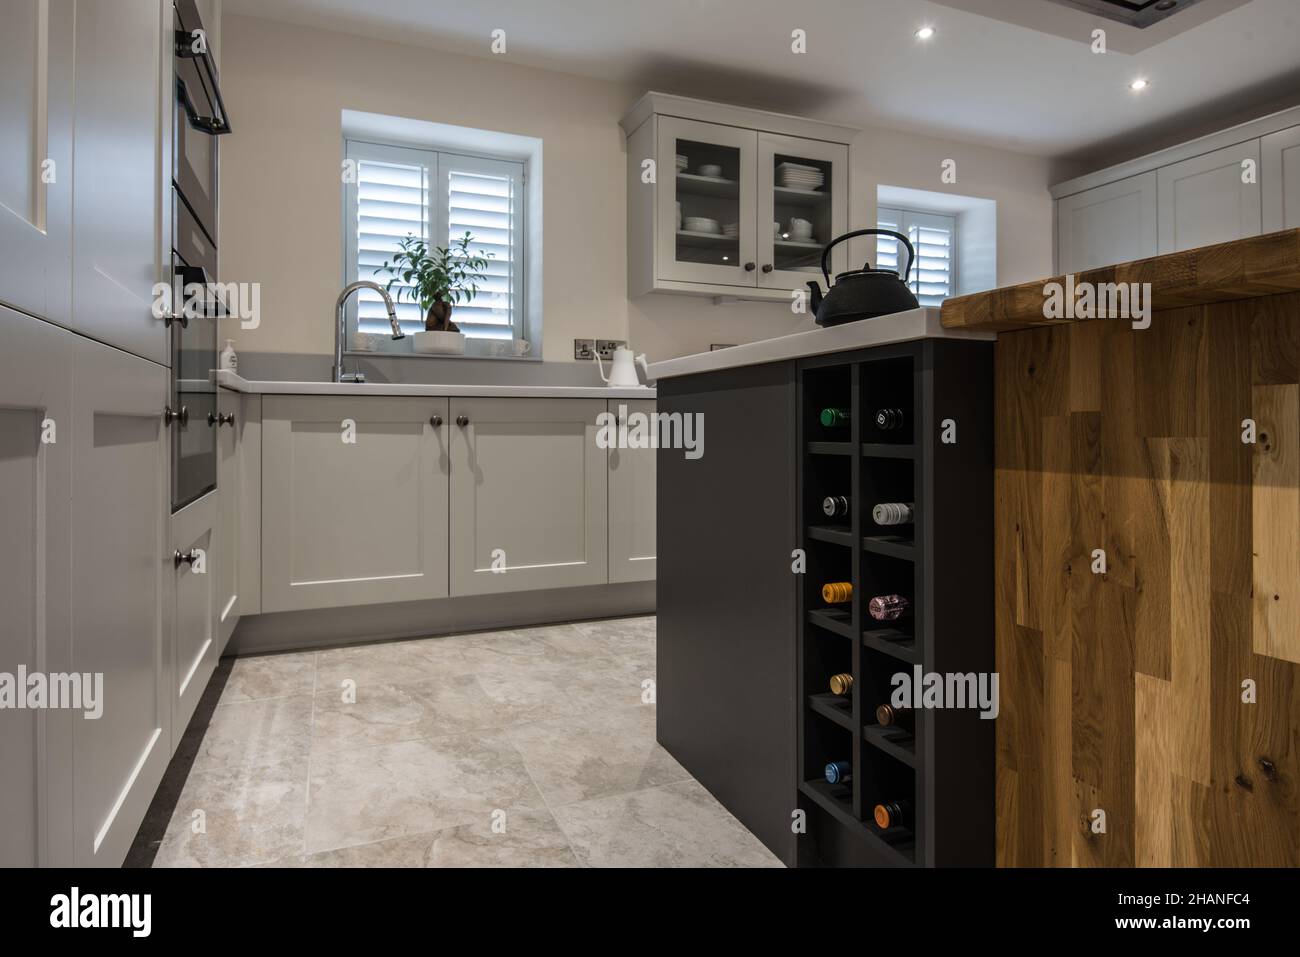 A light,contemporary, fitted kitchen with a wine rack,island,blinds (using mixed materials including blockwood).Has kitchen island with extractor fan. Stock Photo